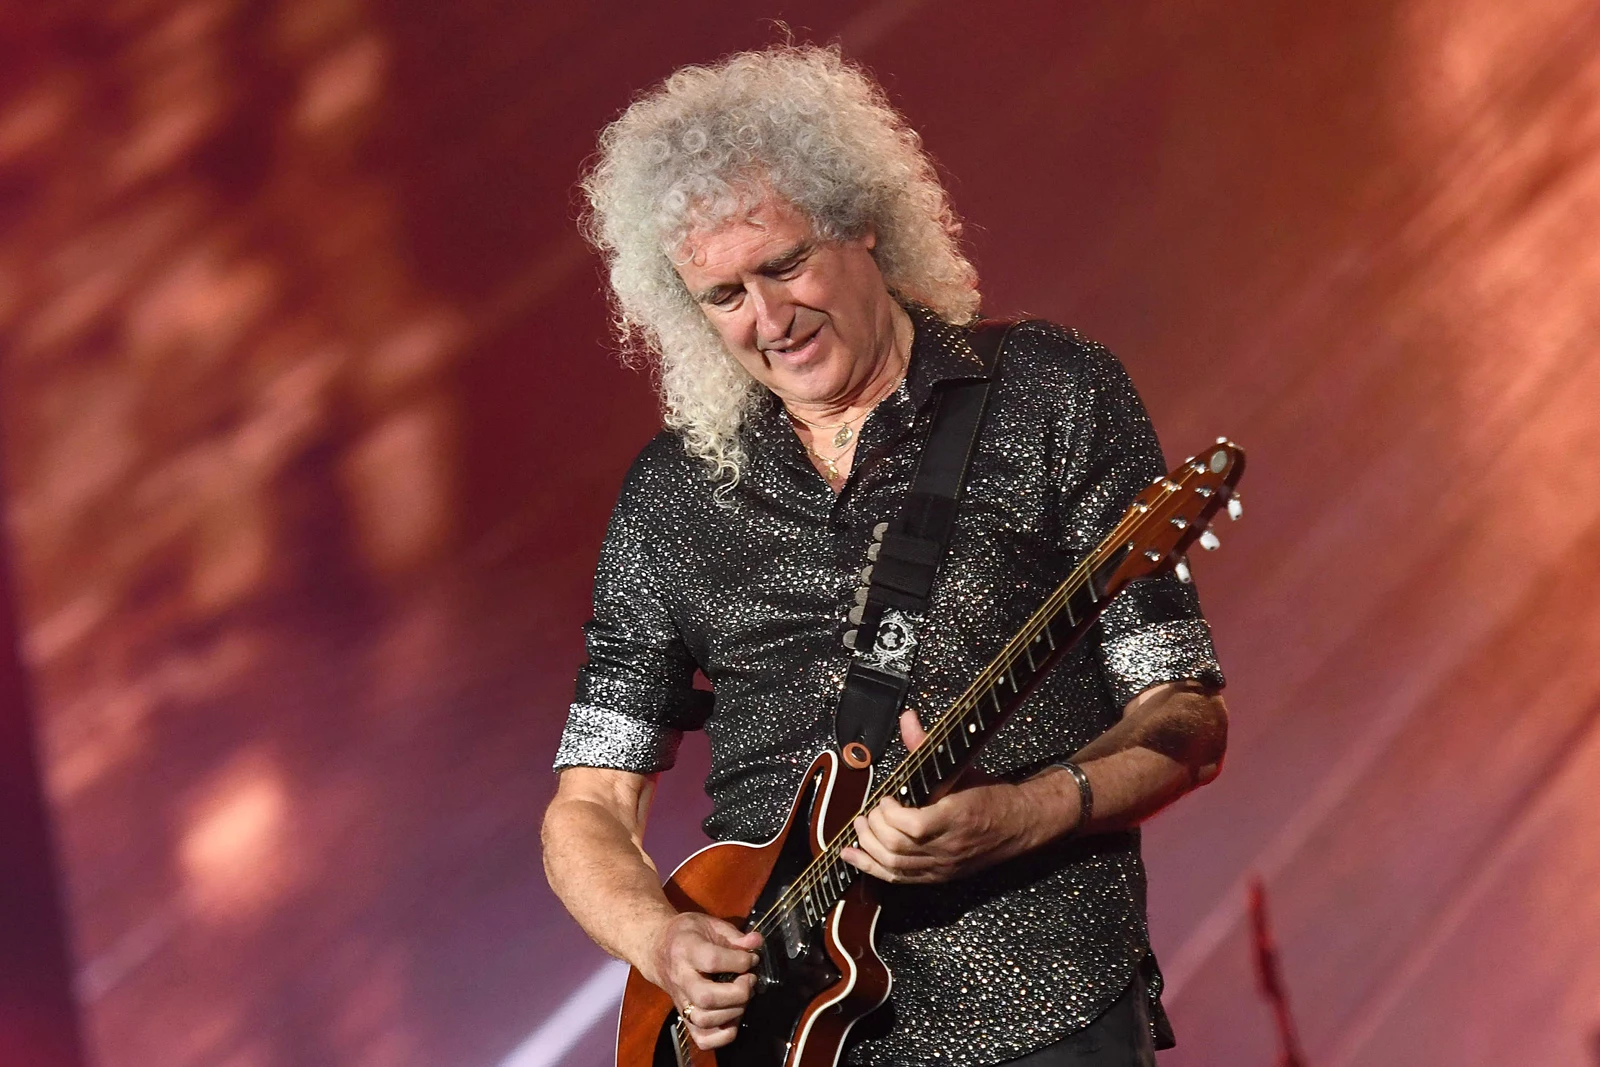 Brian May Says He's 'Grateful to Be Alive' After Health Scares